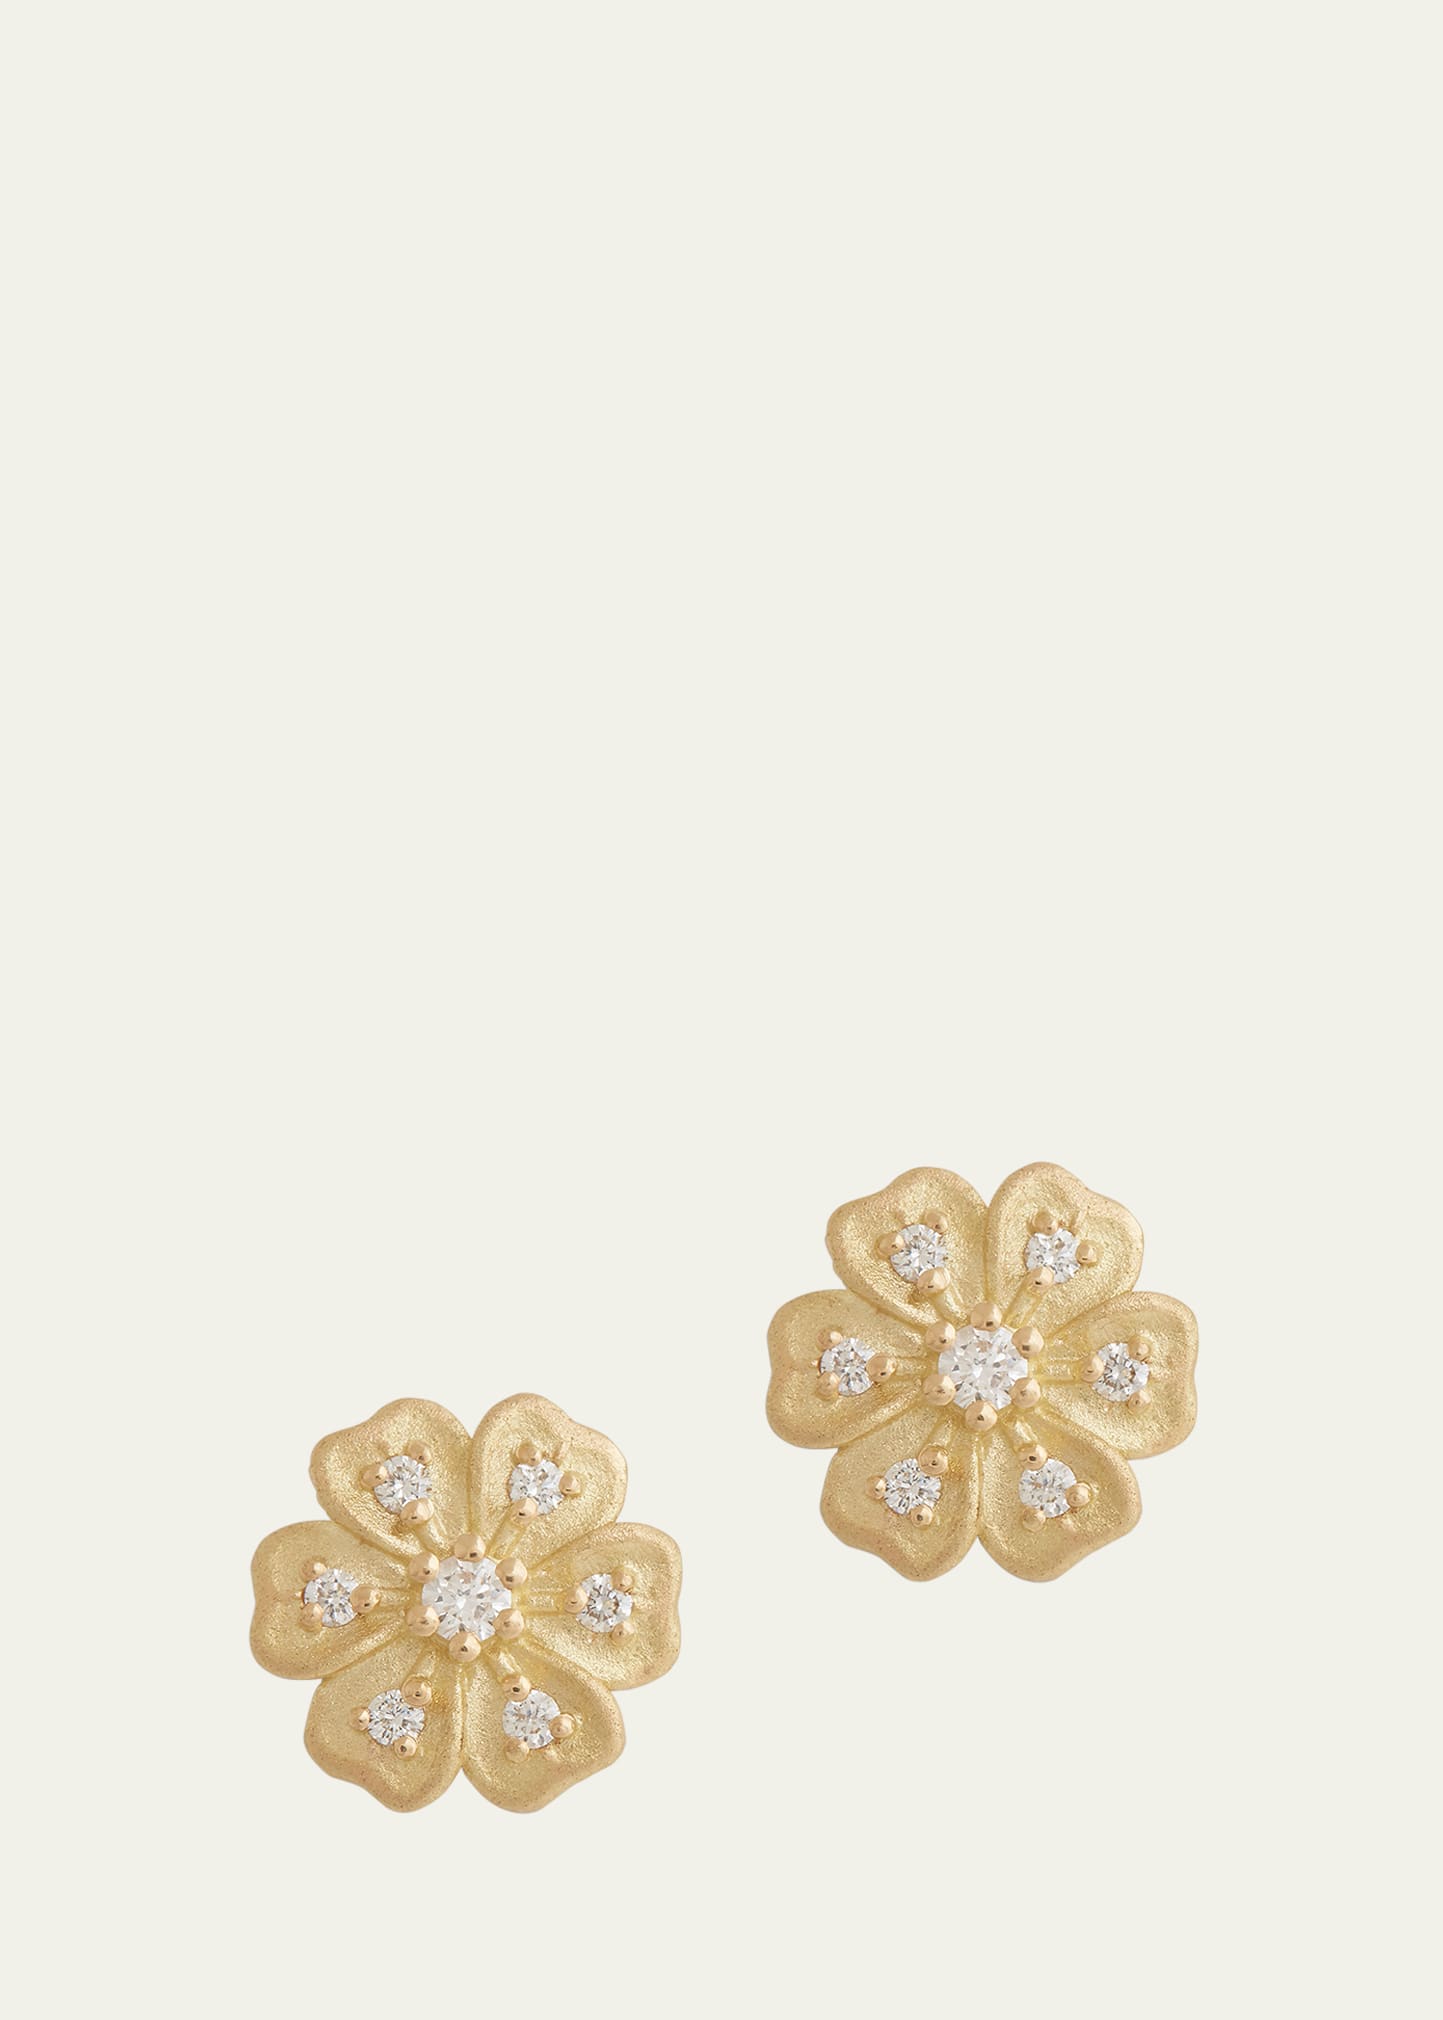 Jamie Wolf 18k Yellow Gold Floral Stud Earrings With Diamonds In Yg